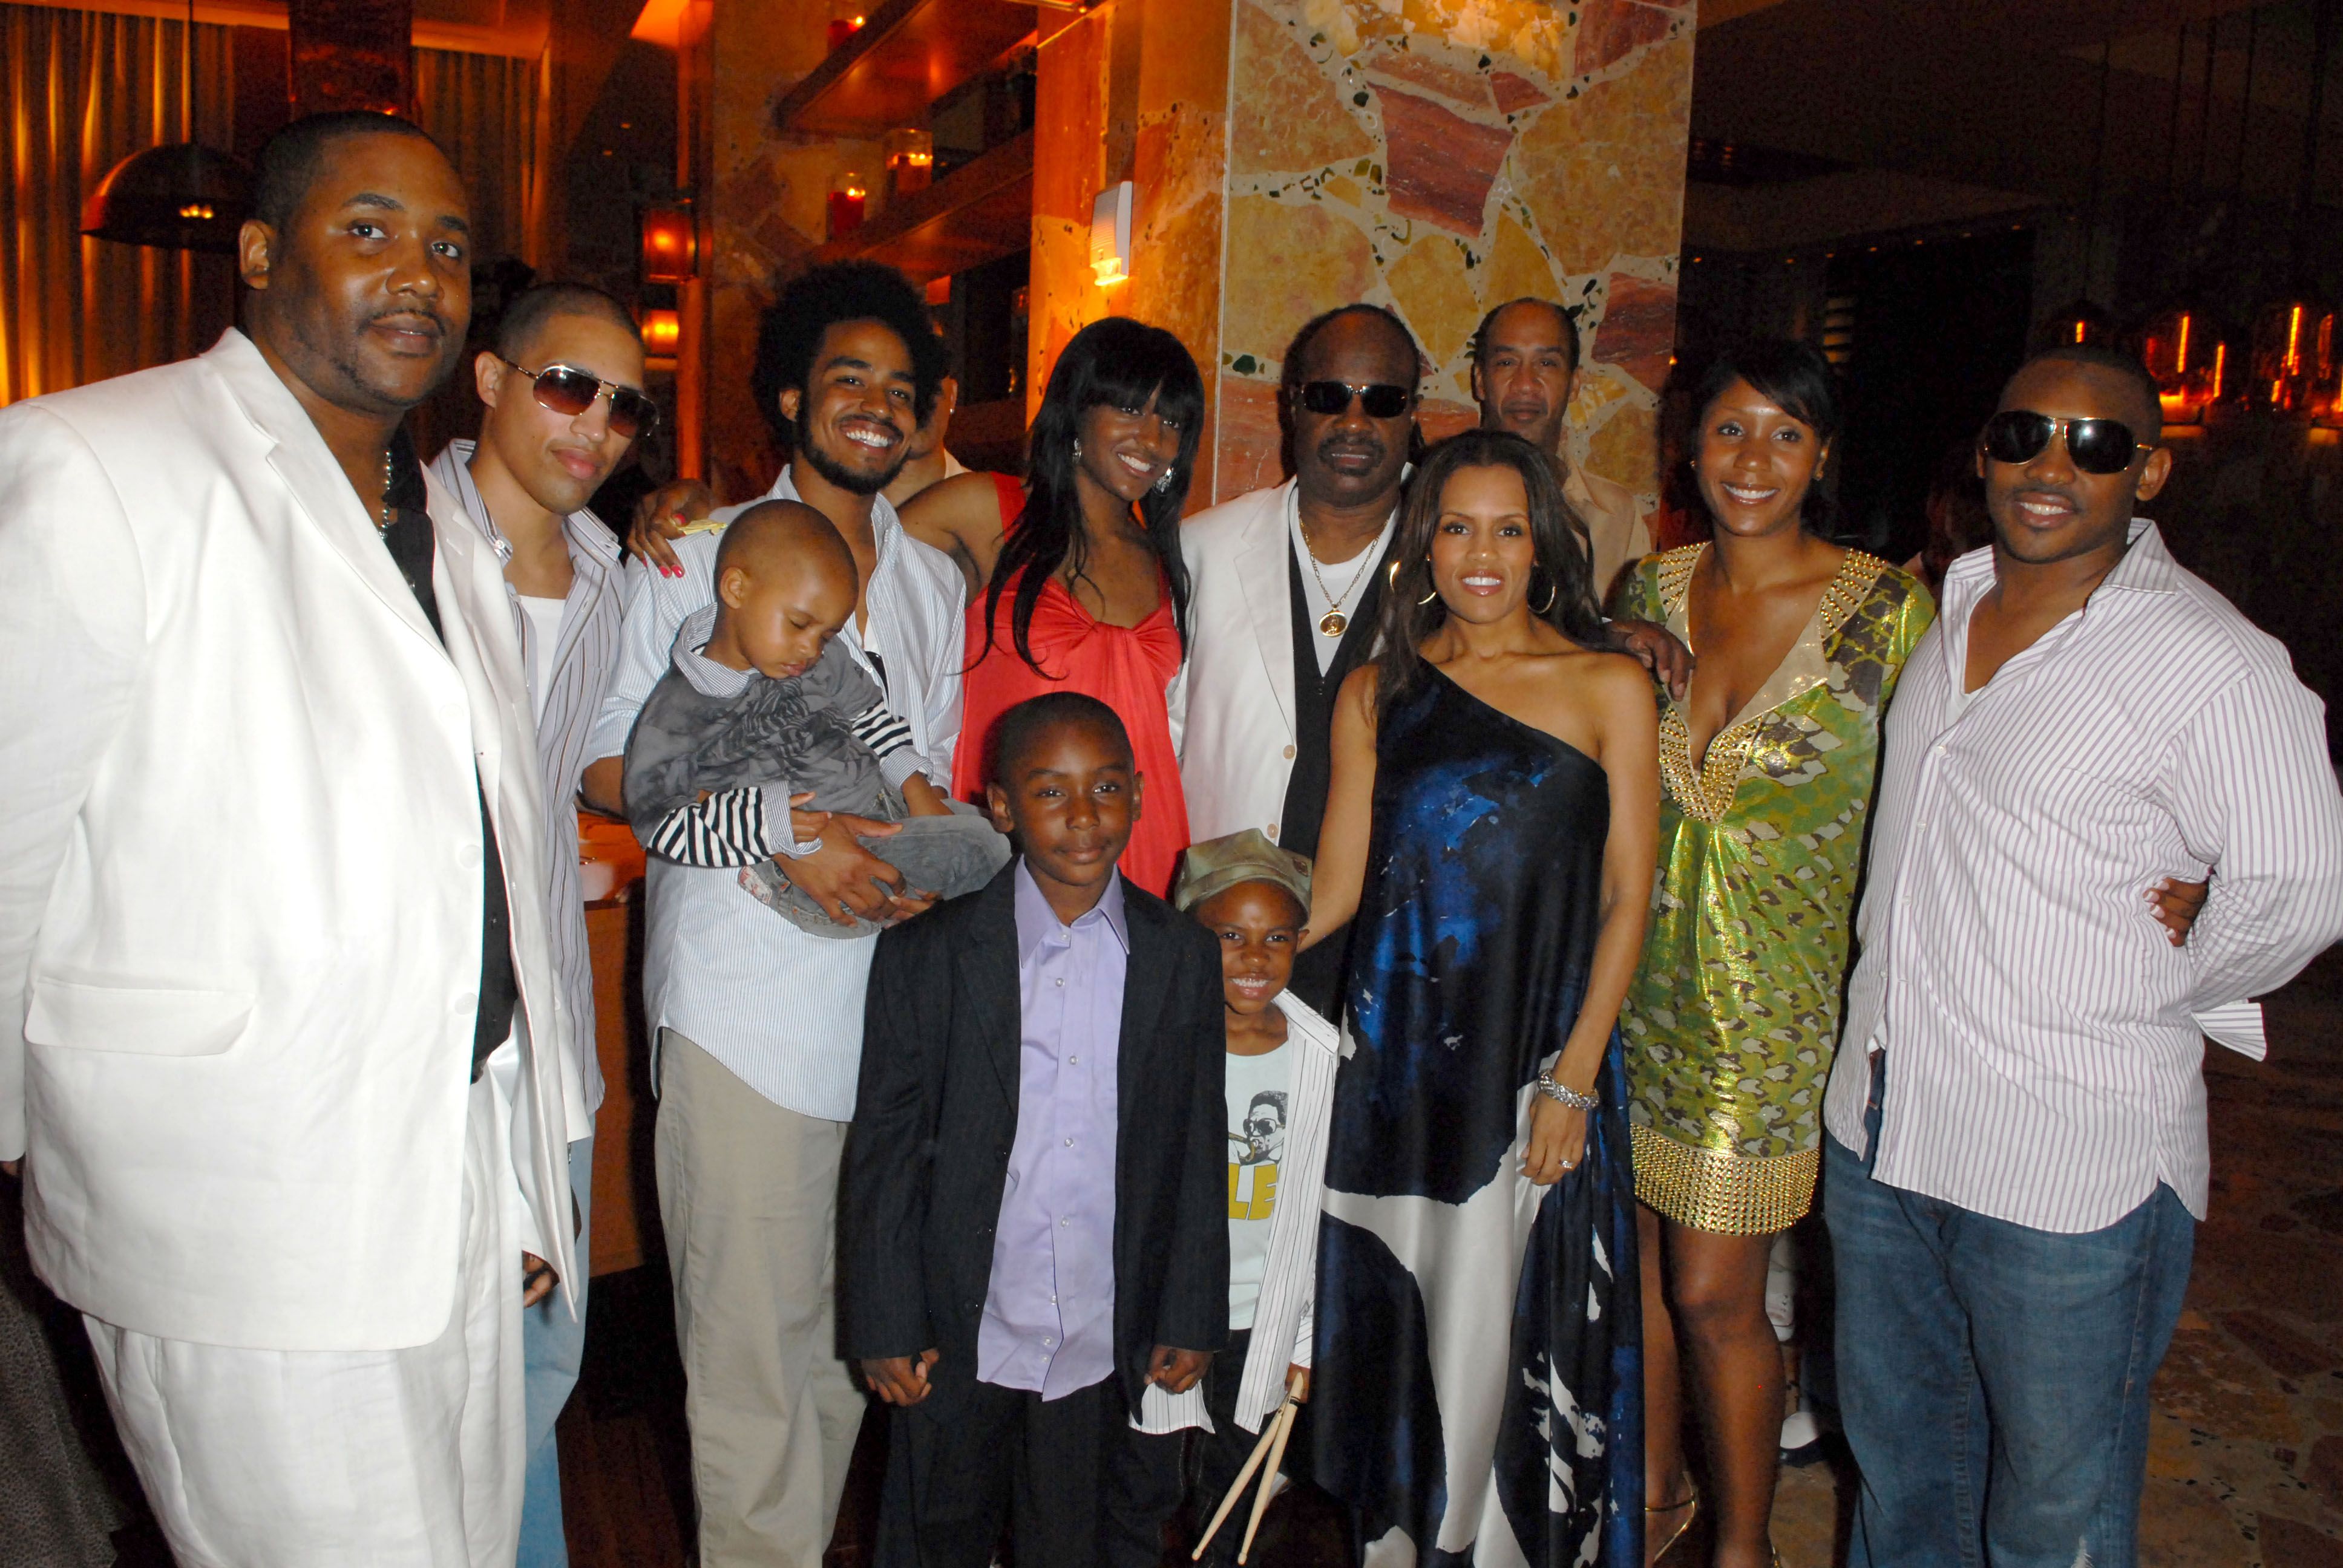 Stevie Wonder and his family attend Sol Kerzner's 57th birthday celebration at The Cove Atlantis Resort on Paradise Island | Source: Getty Images